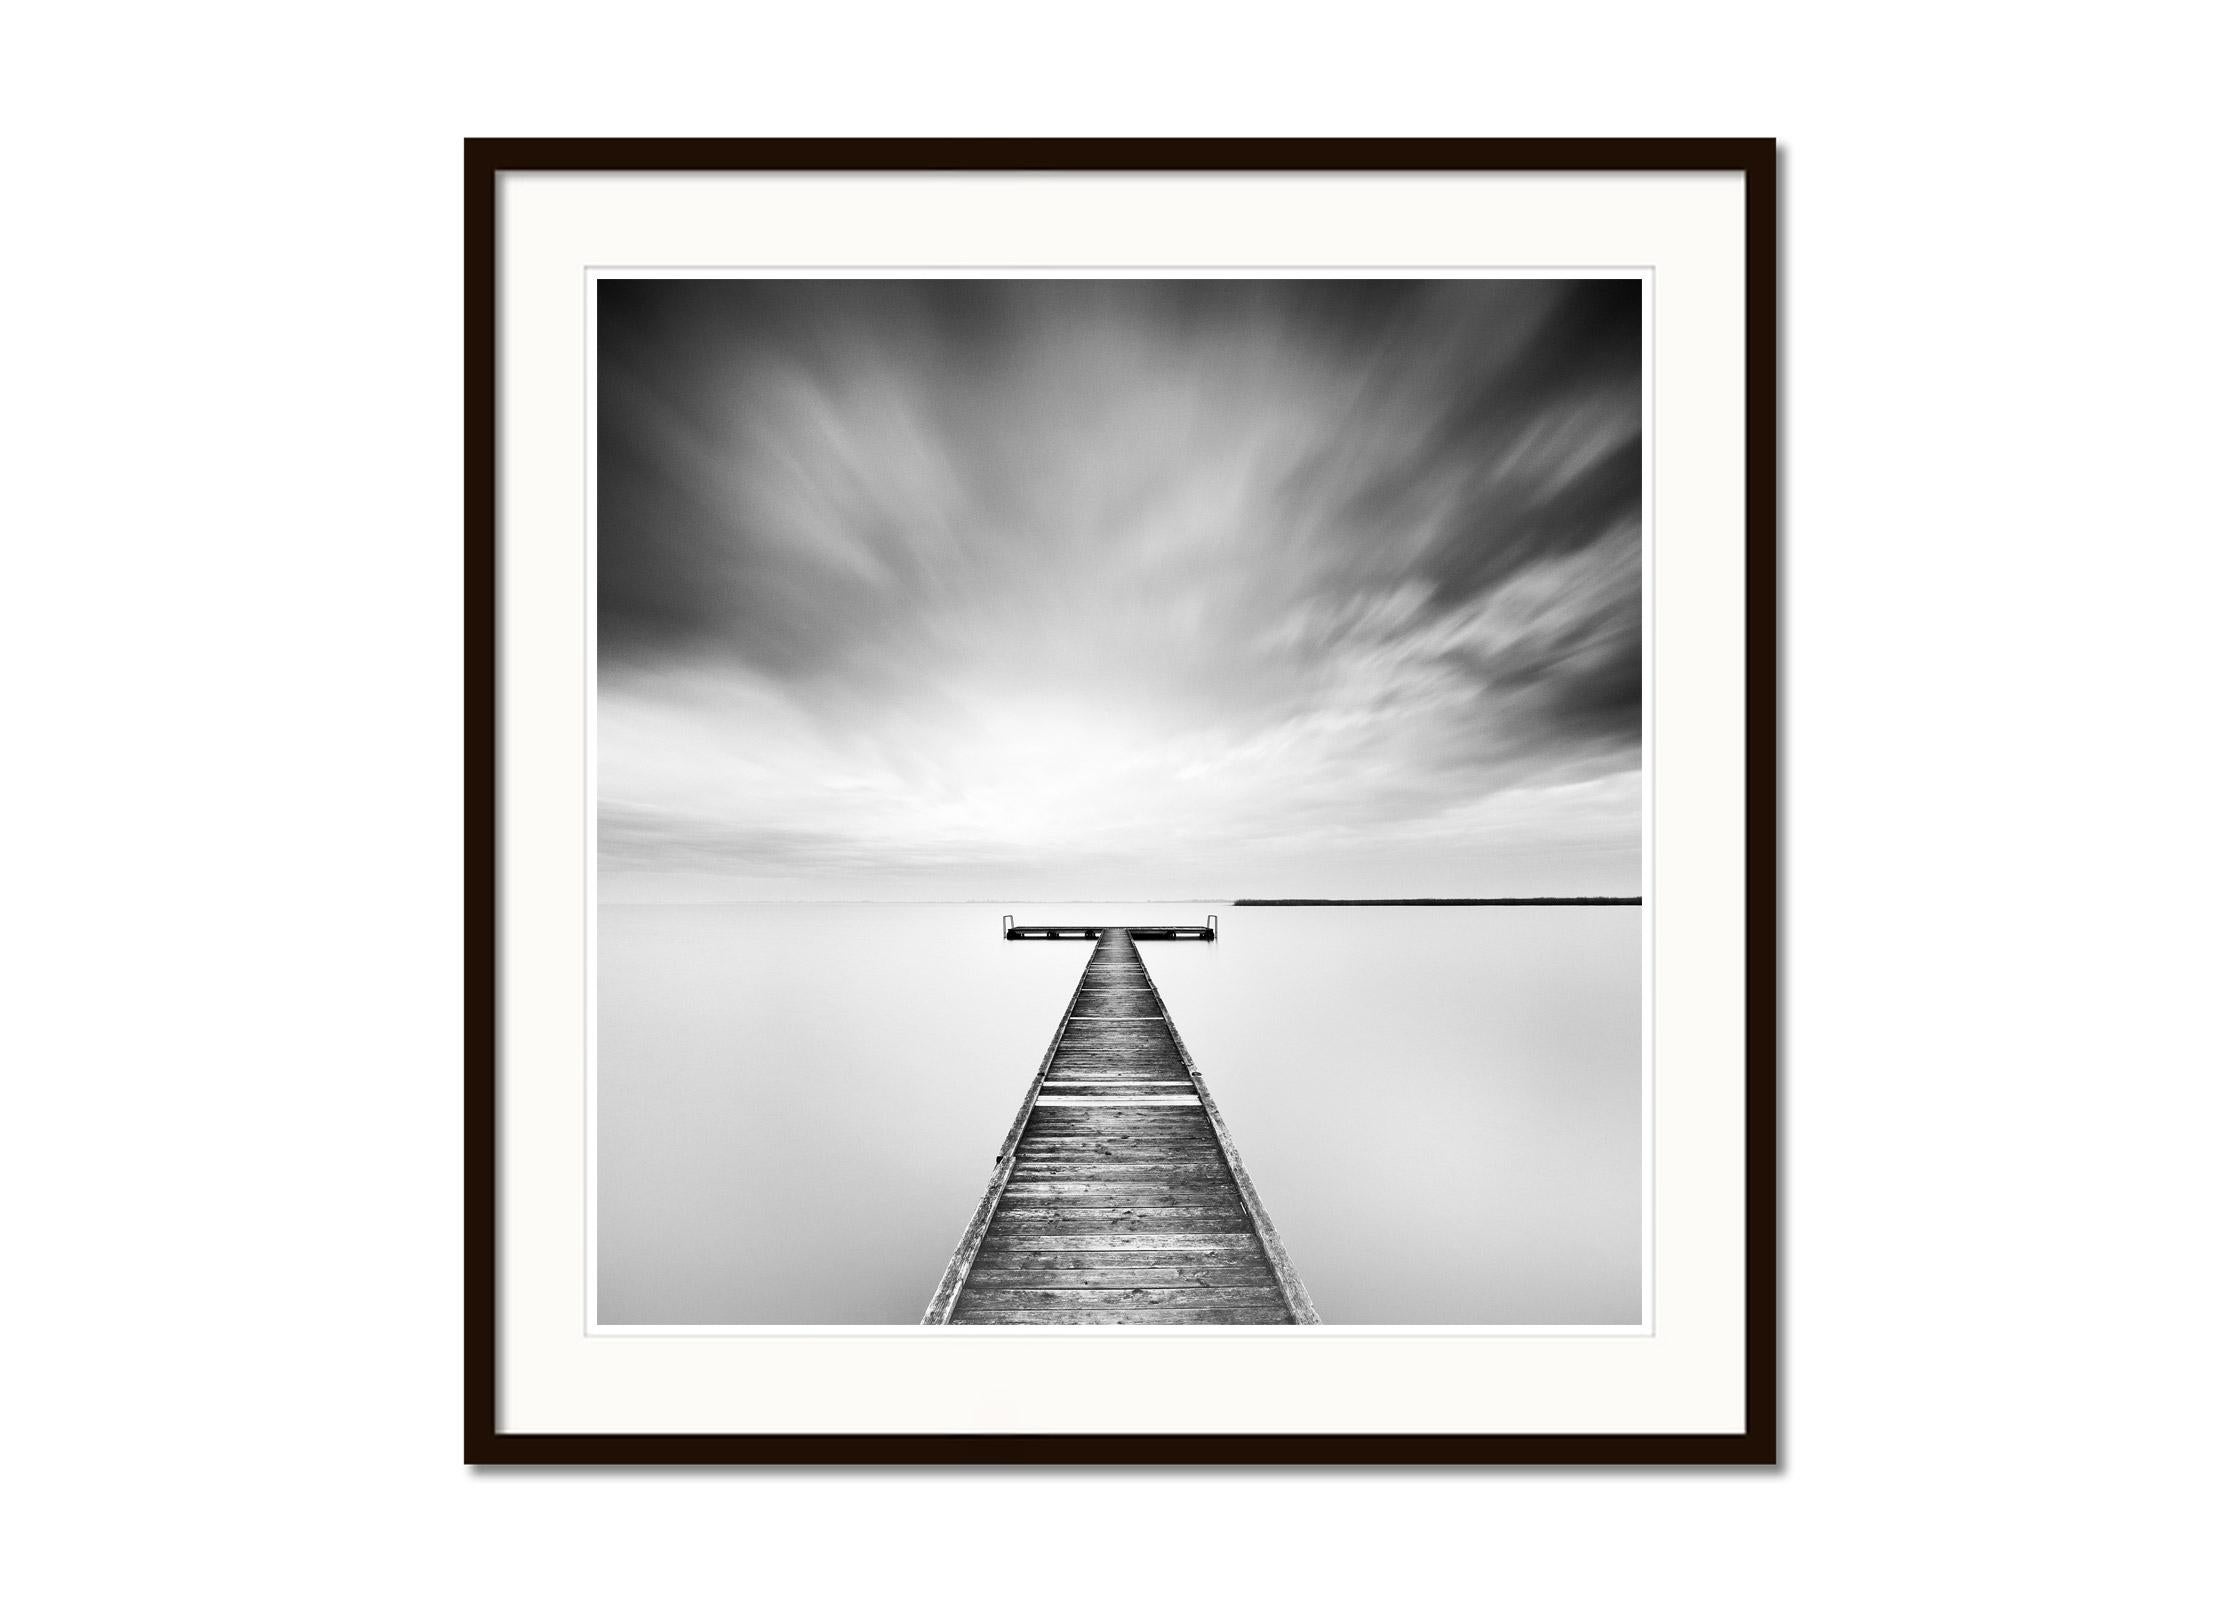 Winter Storm, lake, minimalist wood pier, black white art waterscape photography - Gray Black and White Photograph by Gerald Berghammer